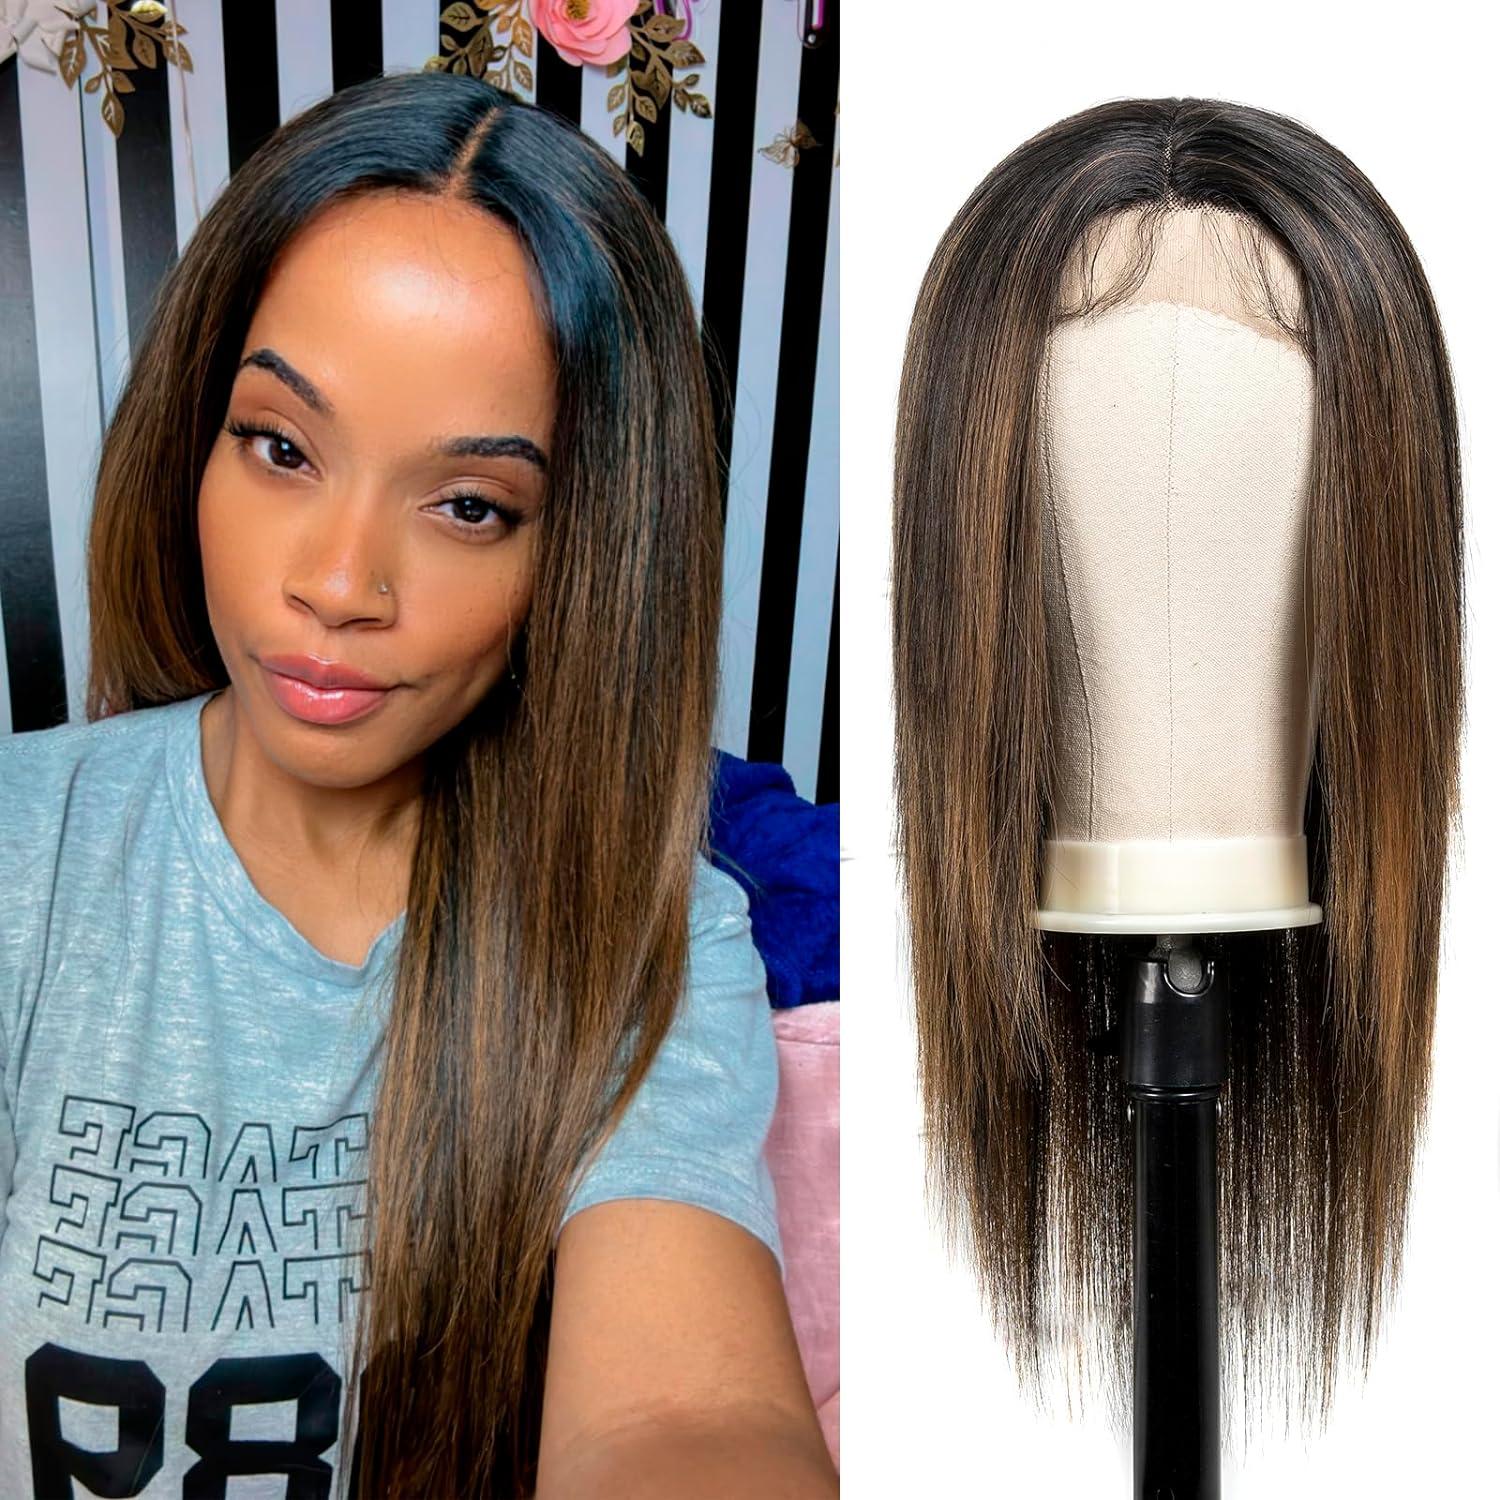 FAST SHIPPING 3-5 DAY Airy Wig | ToyoTress Airy Short Straight Bob Lace Front Wigs - Natural Black Middle Part Wigs For Women, Light Yaki Synthetic Pre-plucked Glueless Wig Heat Resistant For Daily Party